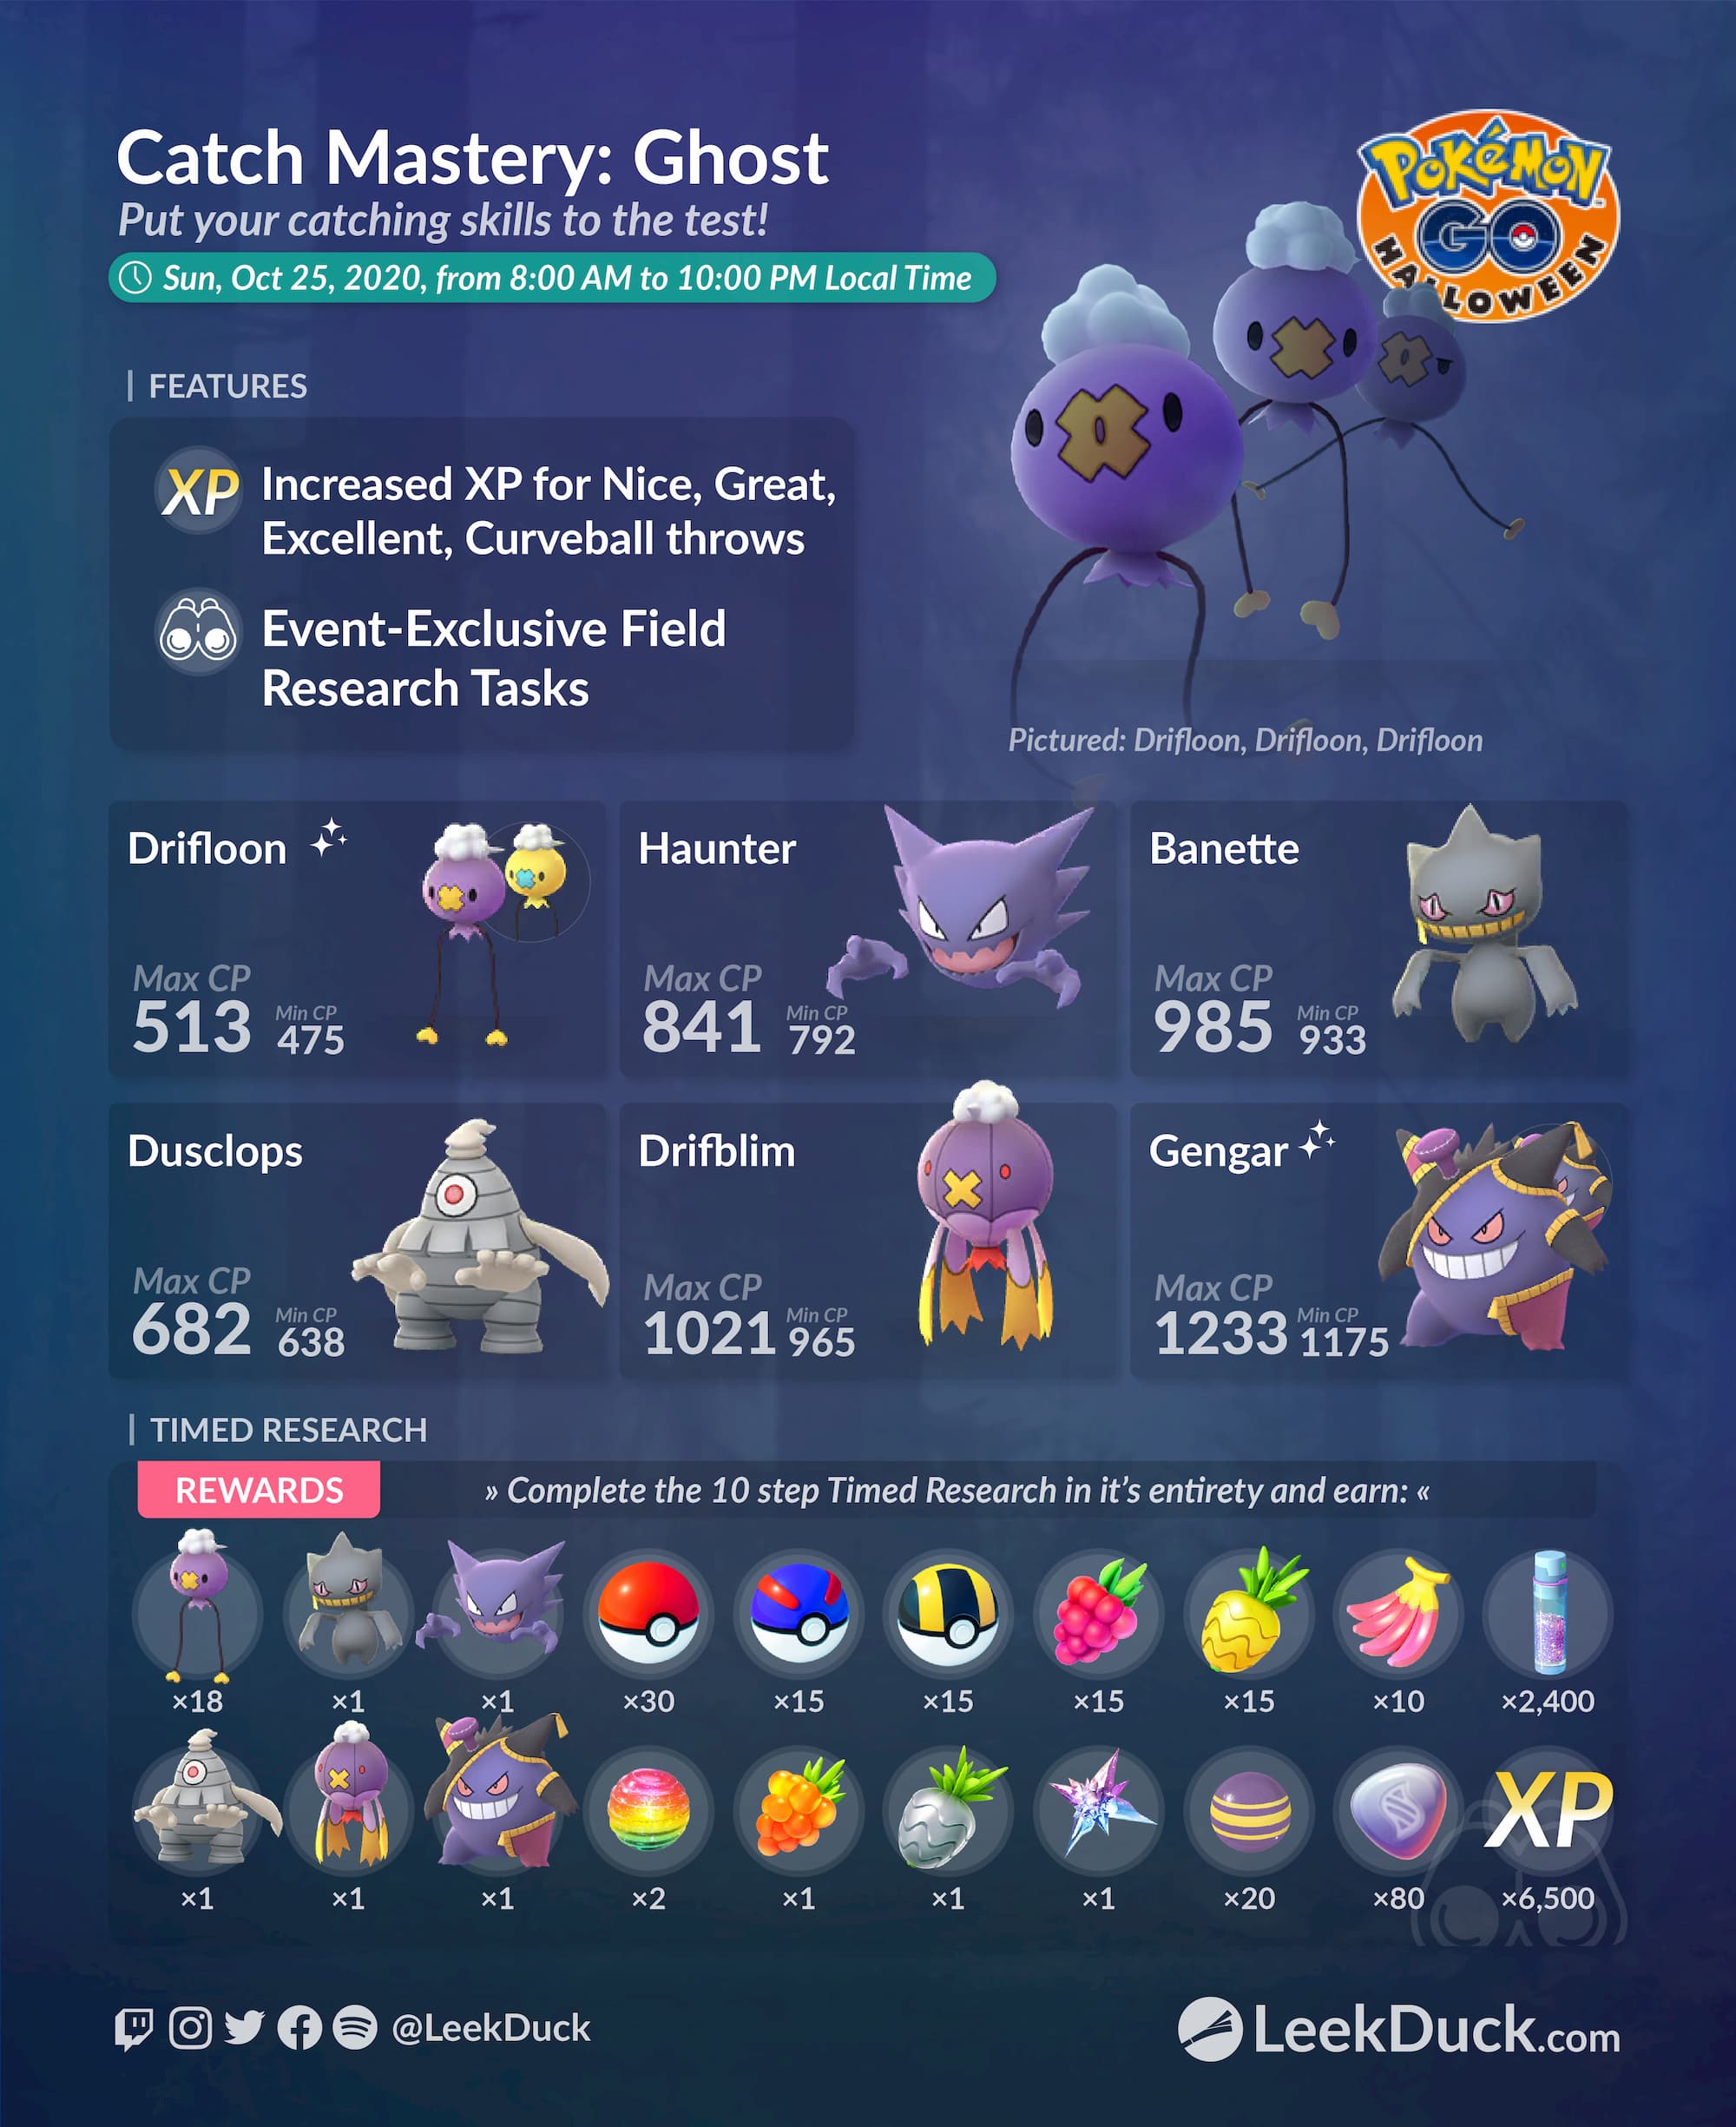 Catch Mastery Ghost Event Leek Duck Pokemon Go News And Resources